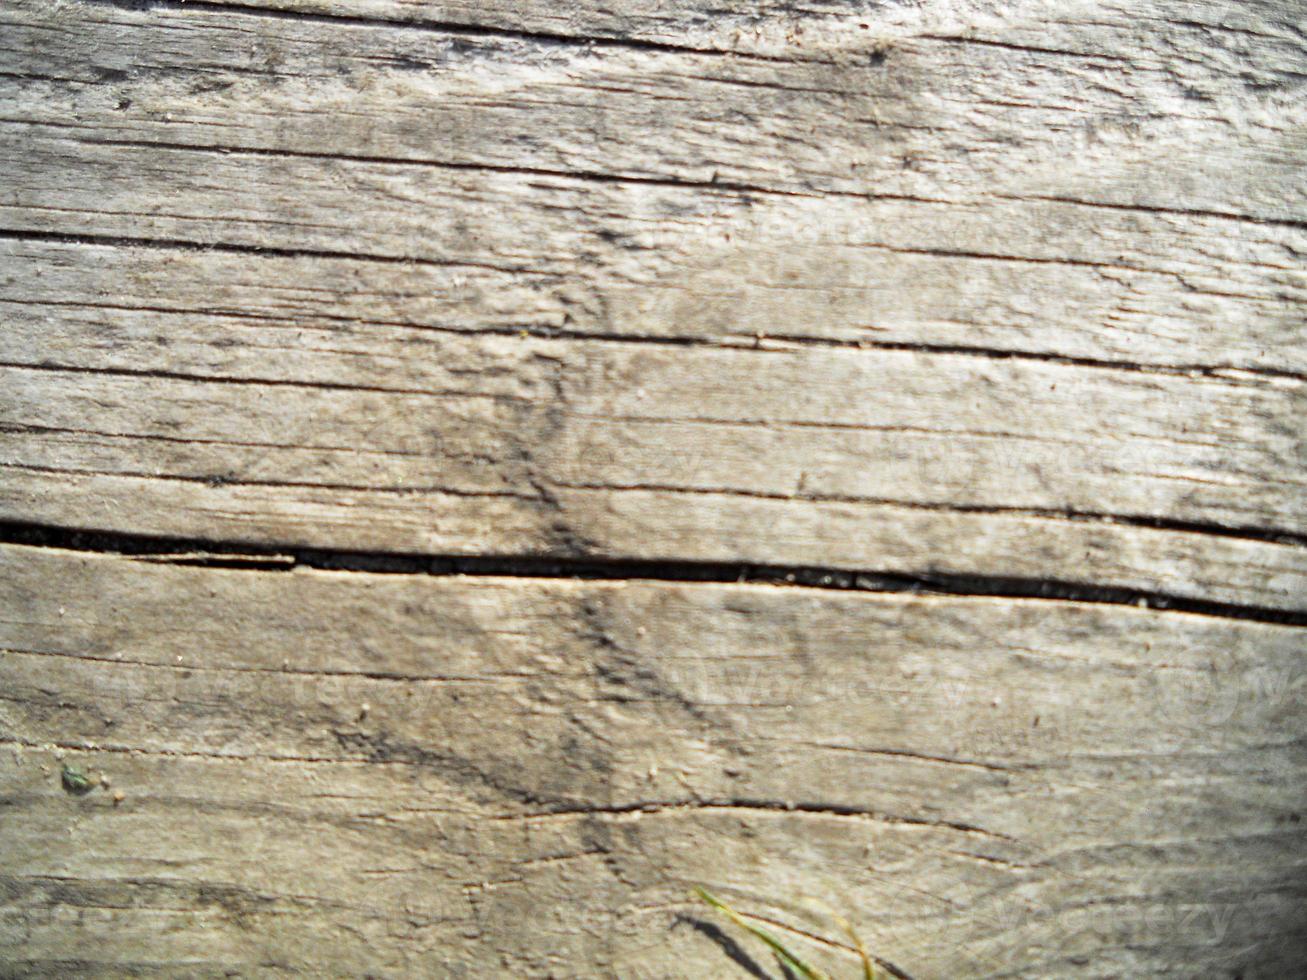 Background texture brown wood, closeup fracture photo